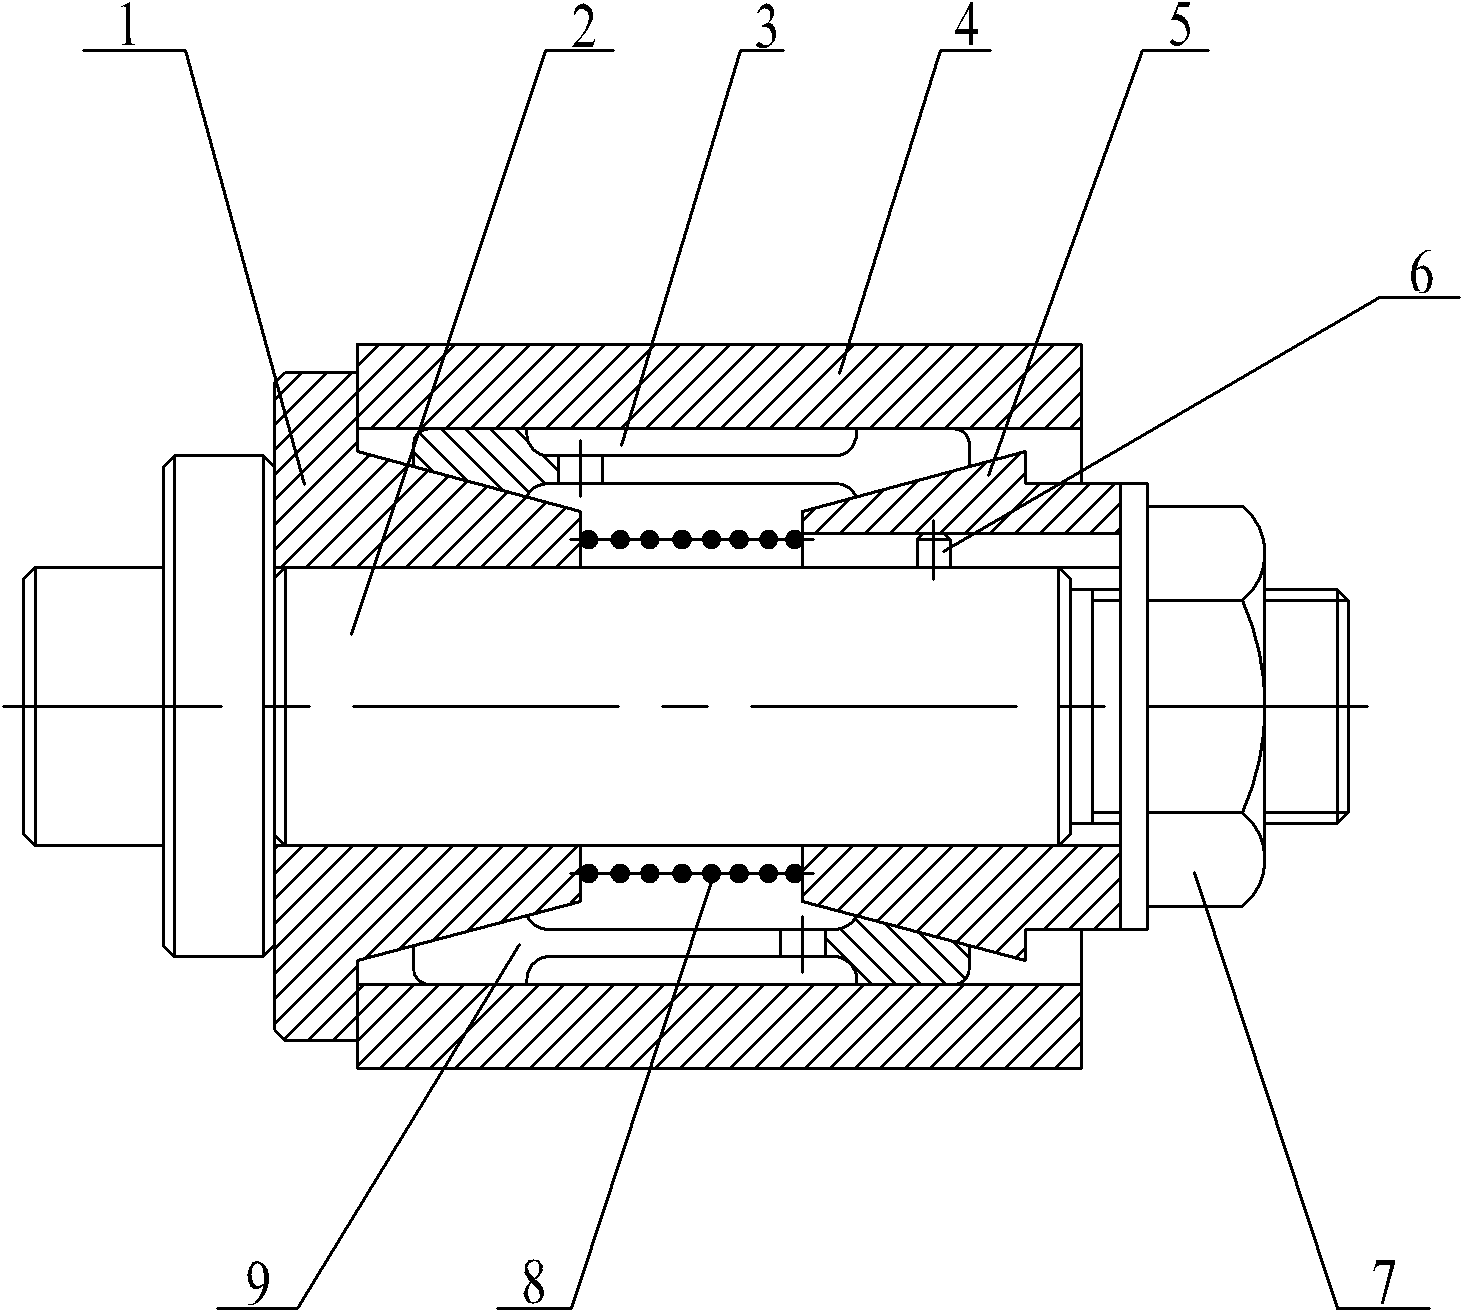 Device capable of elastically clamping two ends of long hole